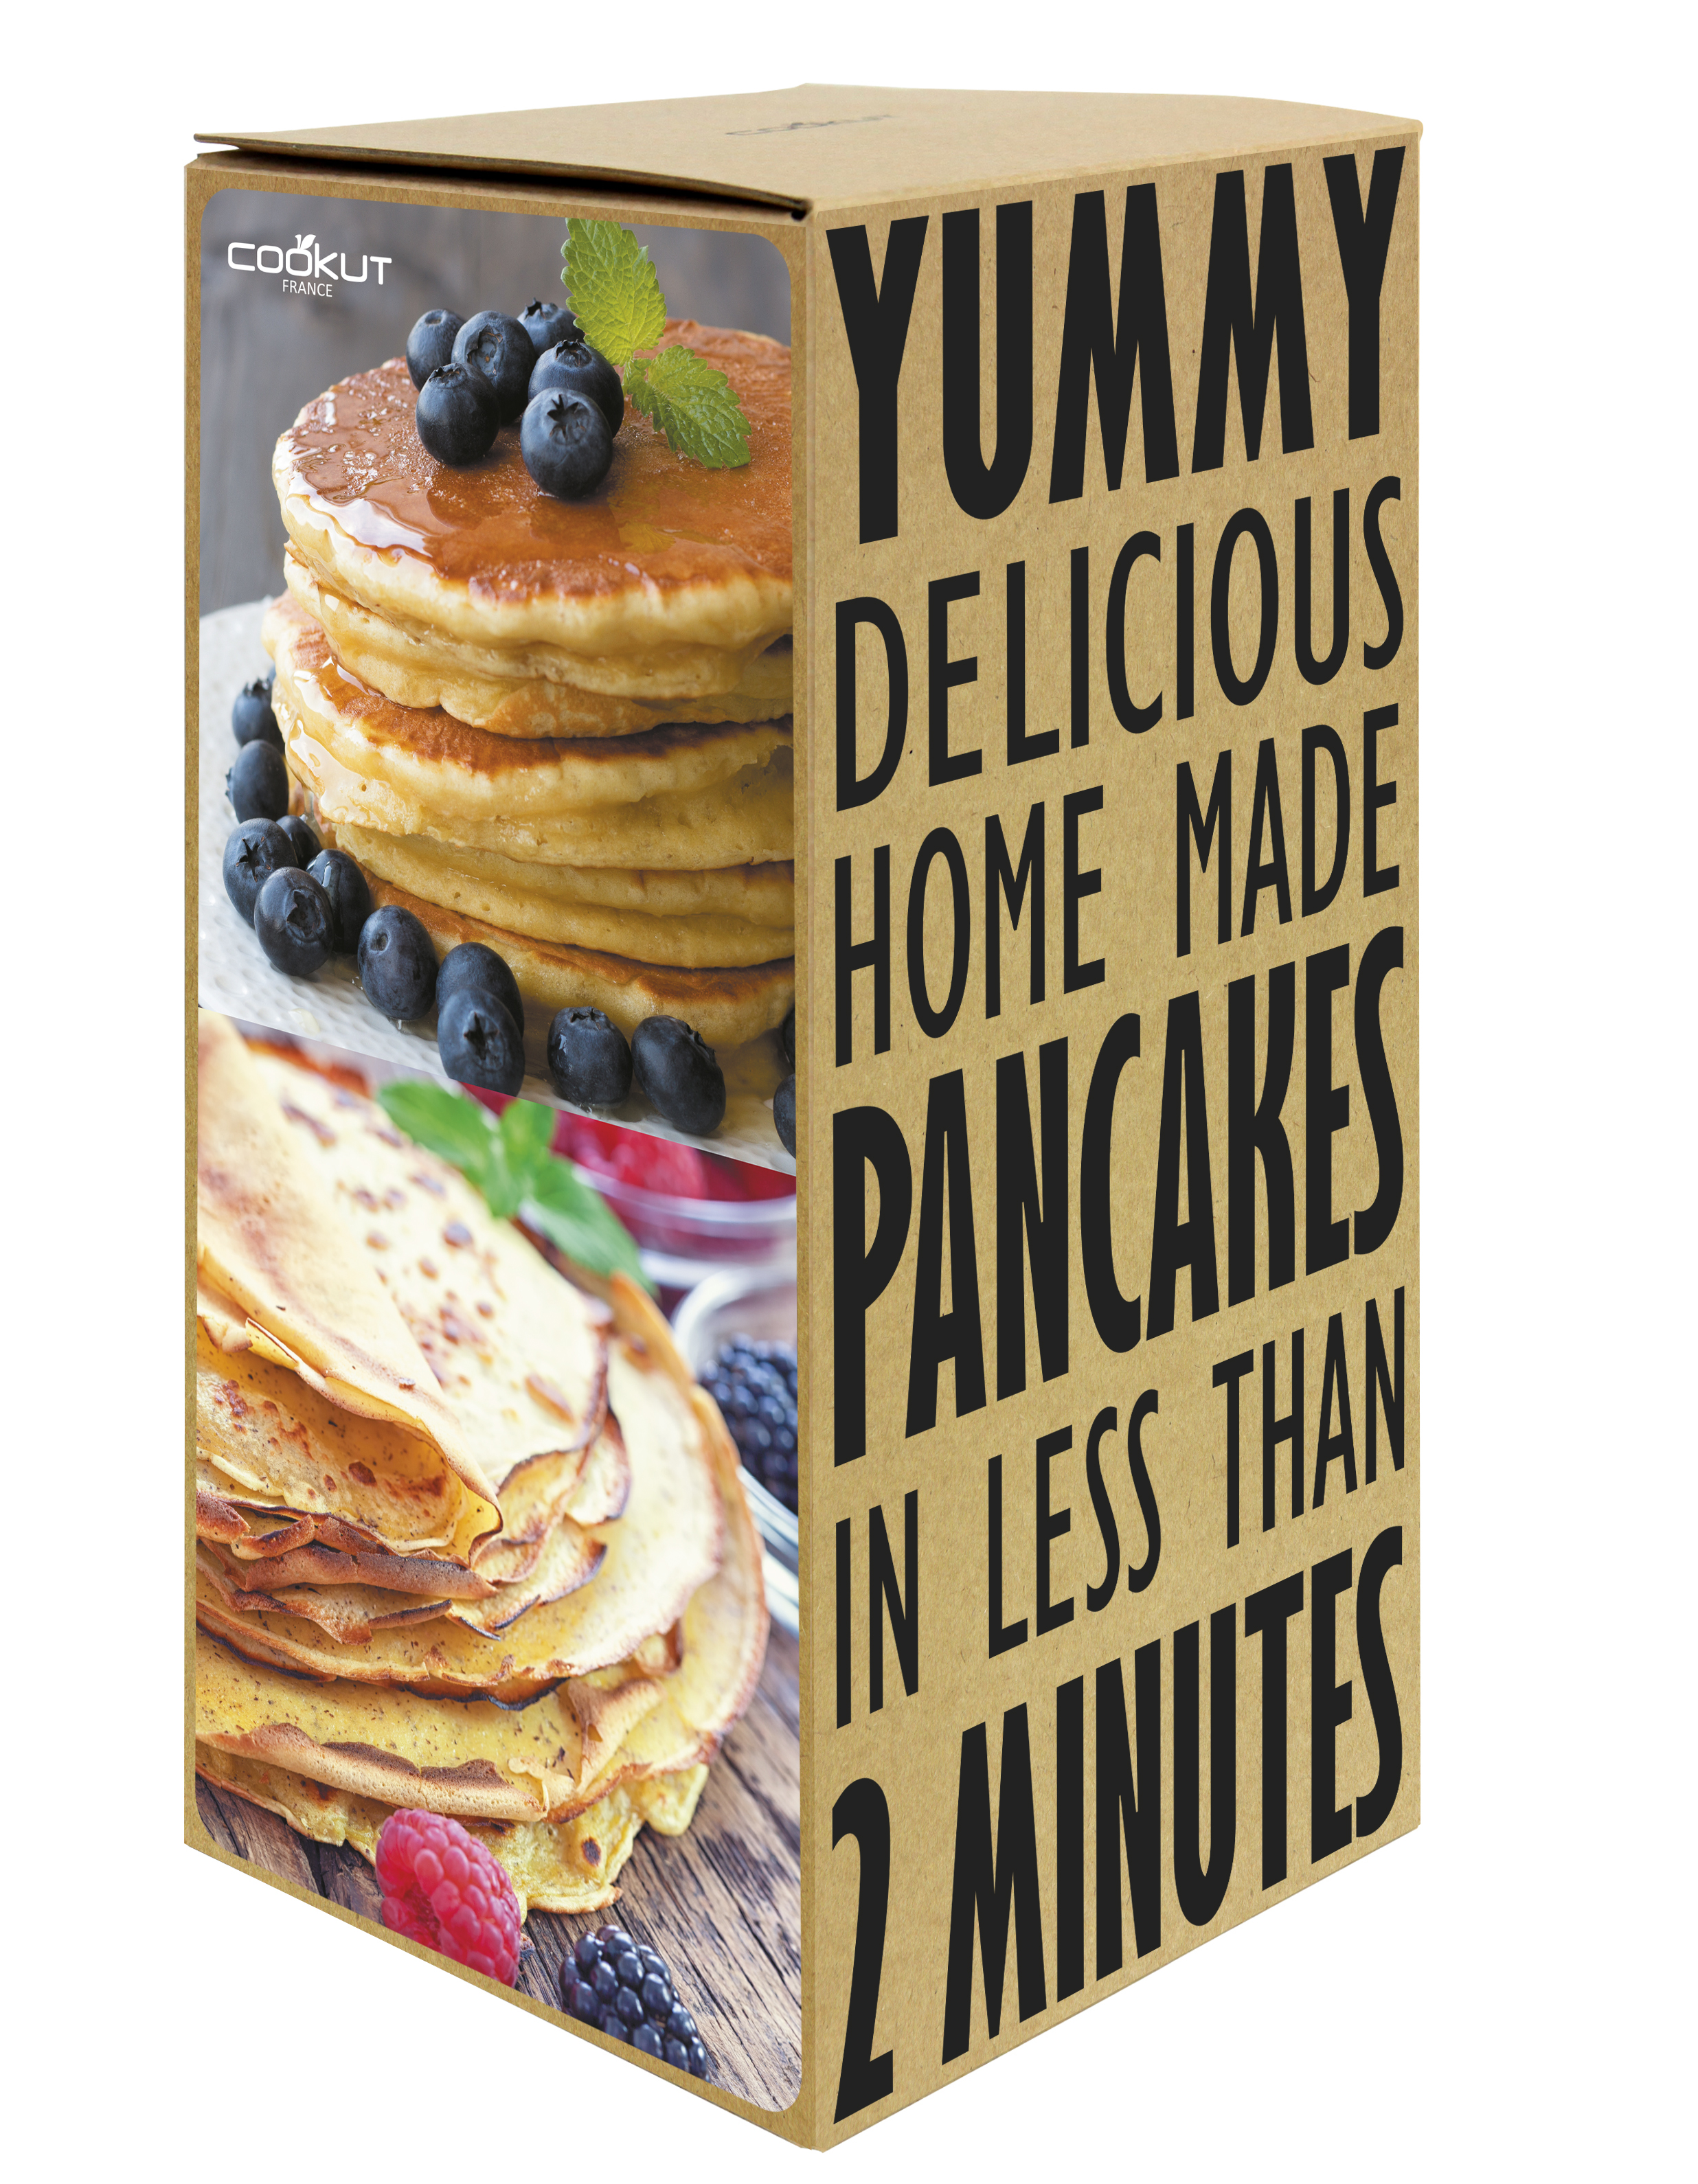 Miam - easy homemade pancakes in 2 minutes